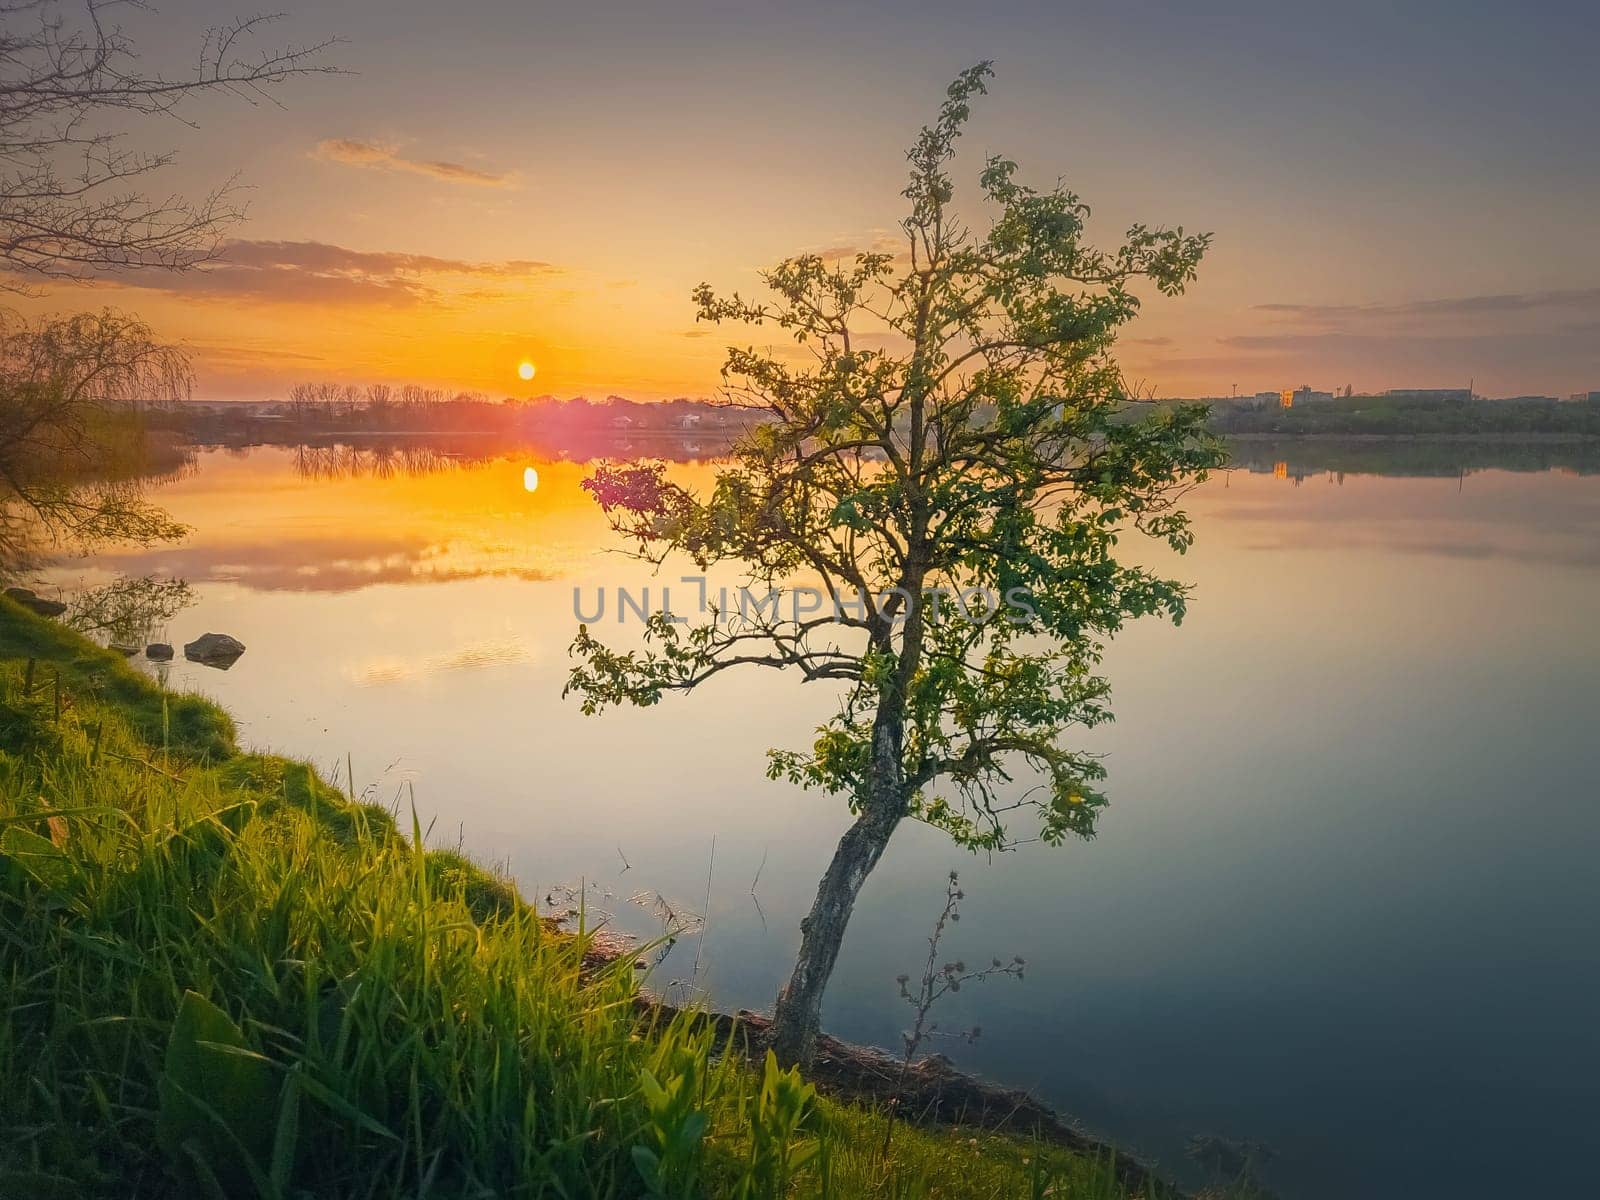 Sundown scene at the lake with a single tree on the shore. Vibrant sunset reflecting in the pond calm water. Idyllic spring landscape by psychoshadow